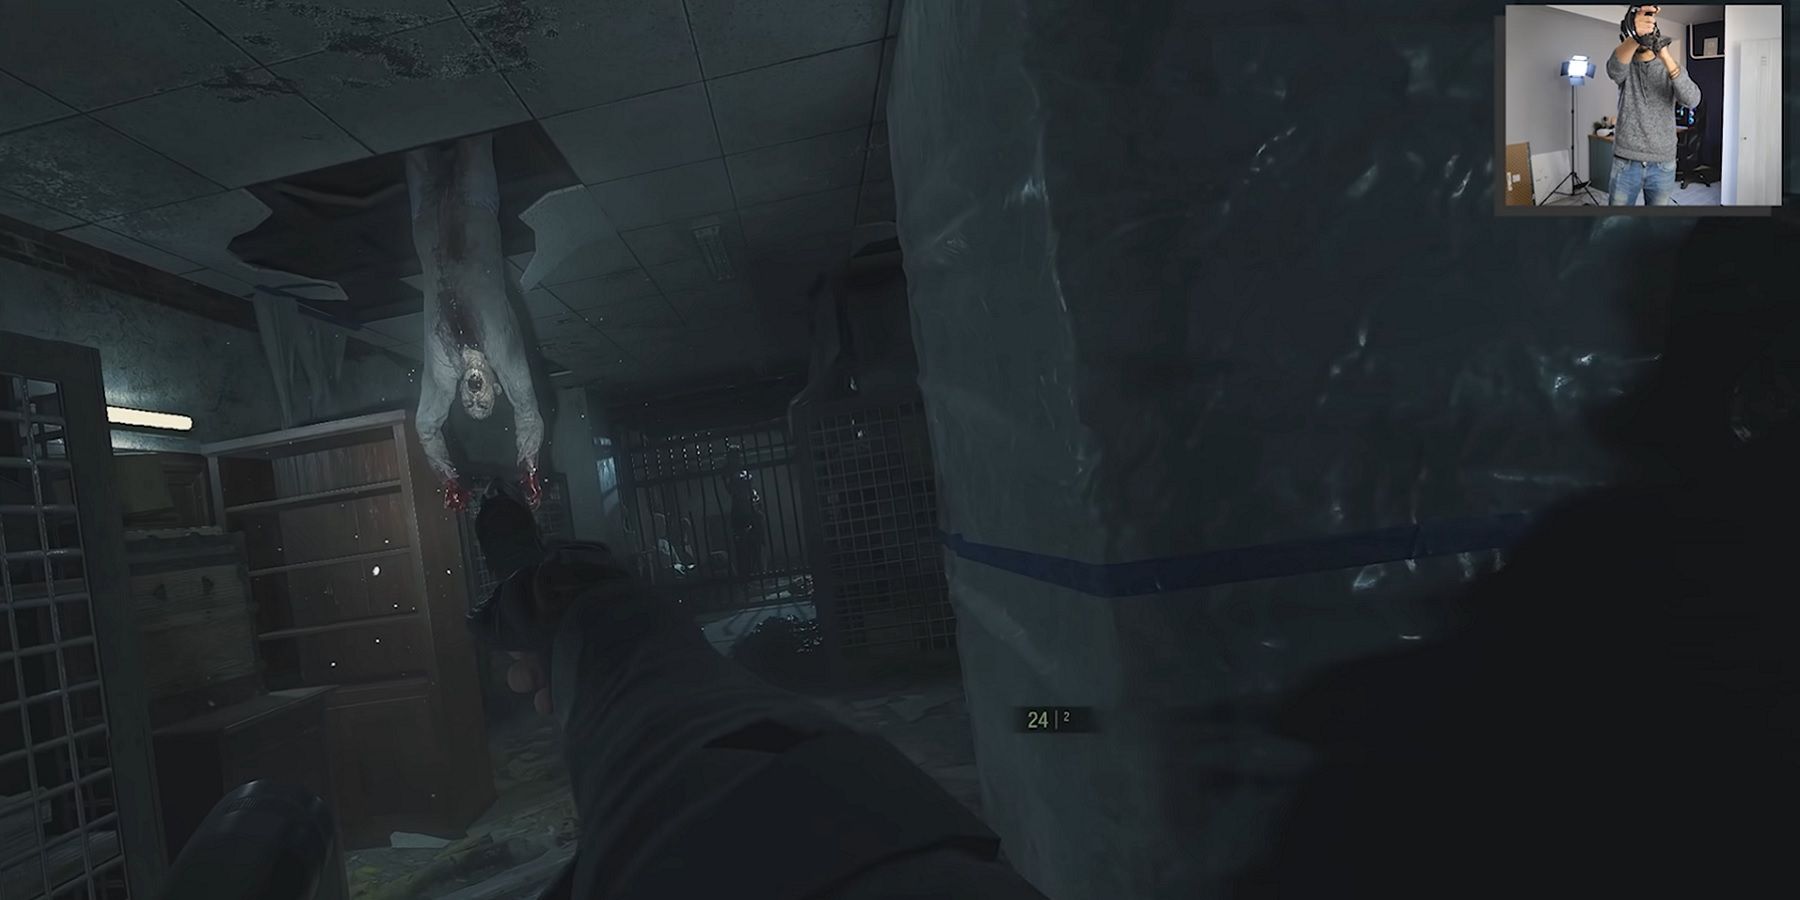 Screenshot from Resident Evil 2 VR showing the person playing in the corner of the screen.